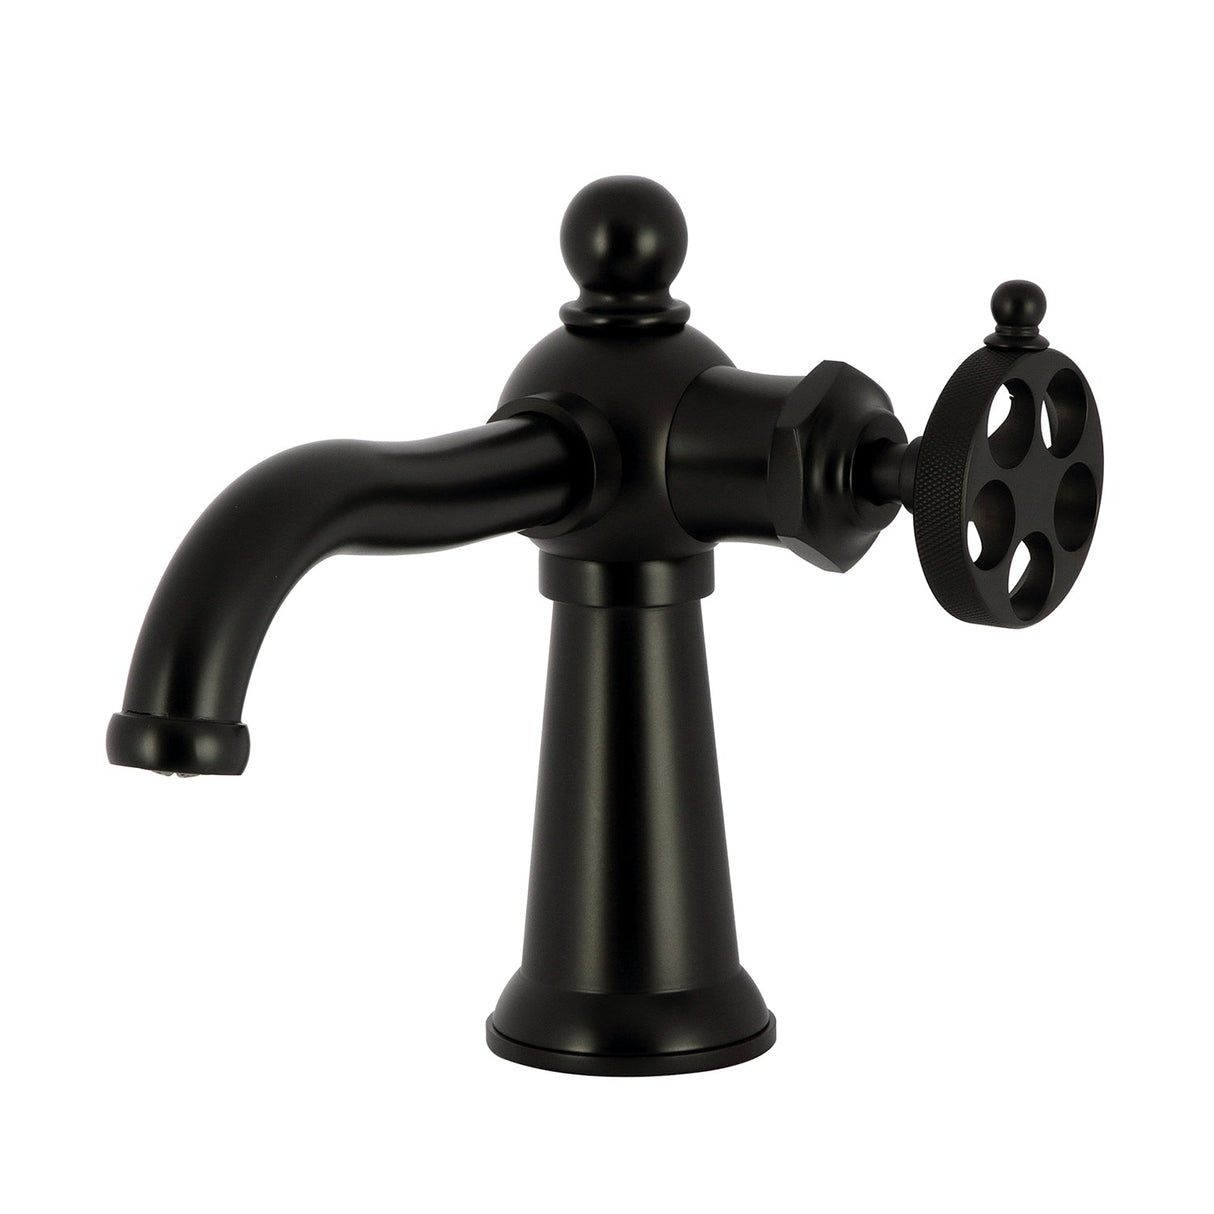 Wendell KS3540RKZ Single-Handle 1-Hole Deck Mount Bathroom Faucet with Knurled Handle and Push Pop-Up Drain, Matte Black